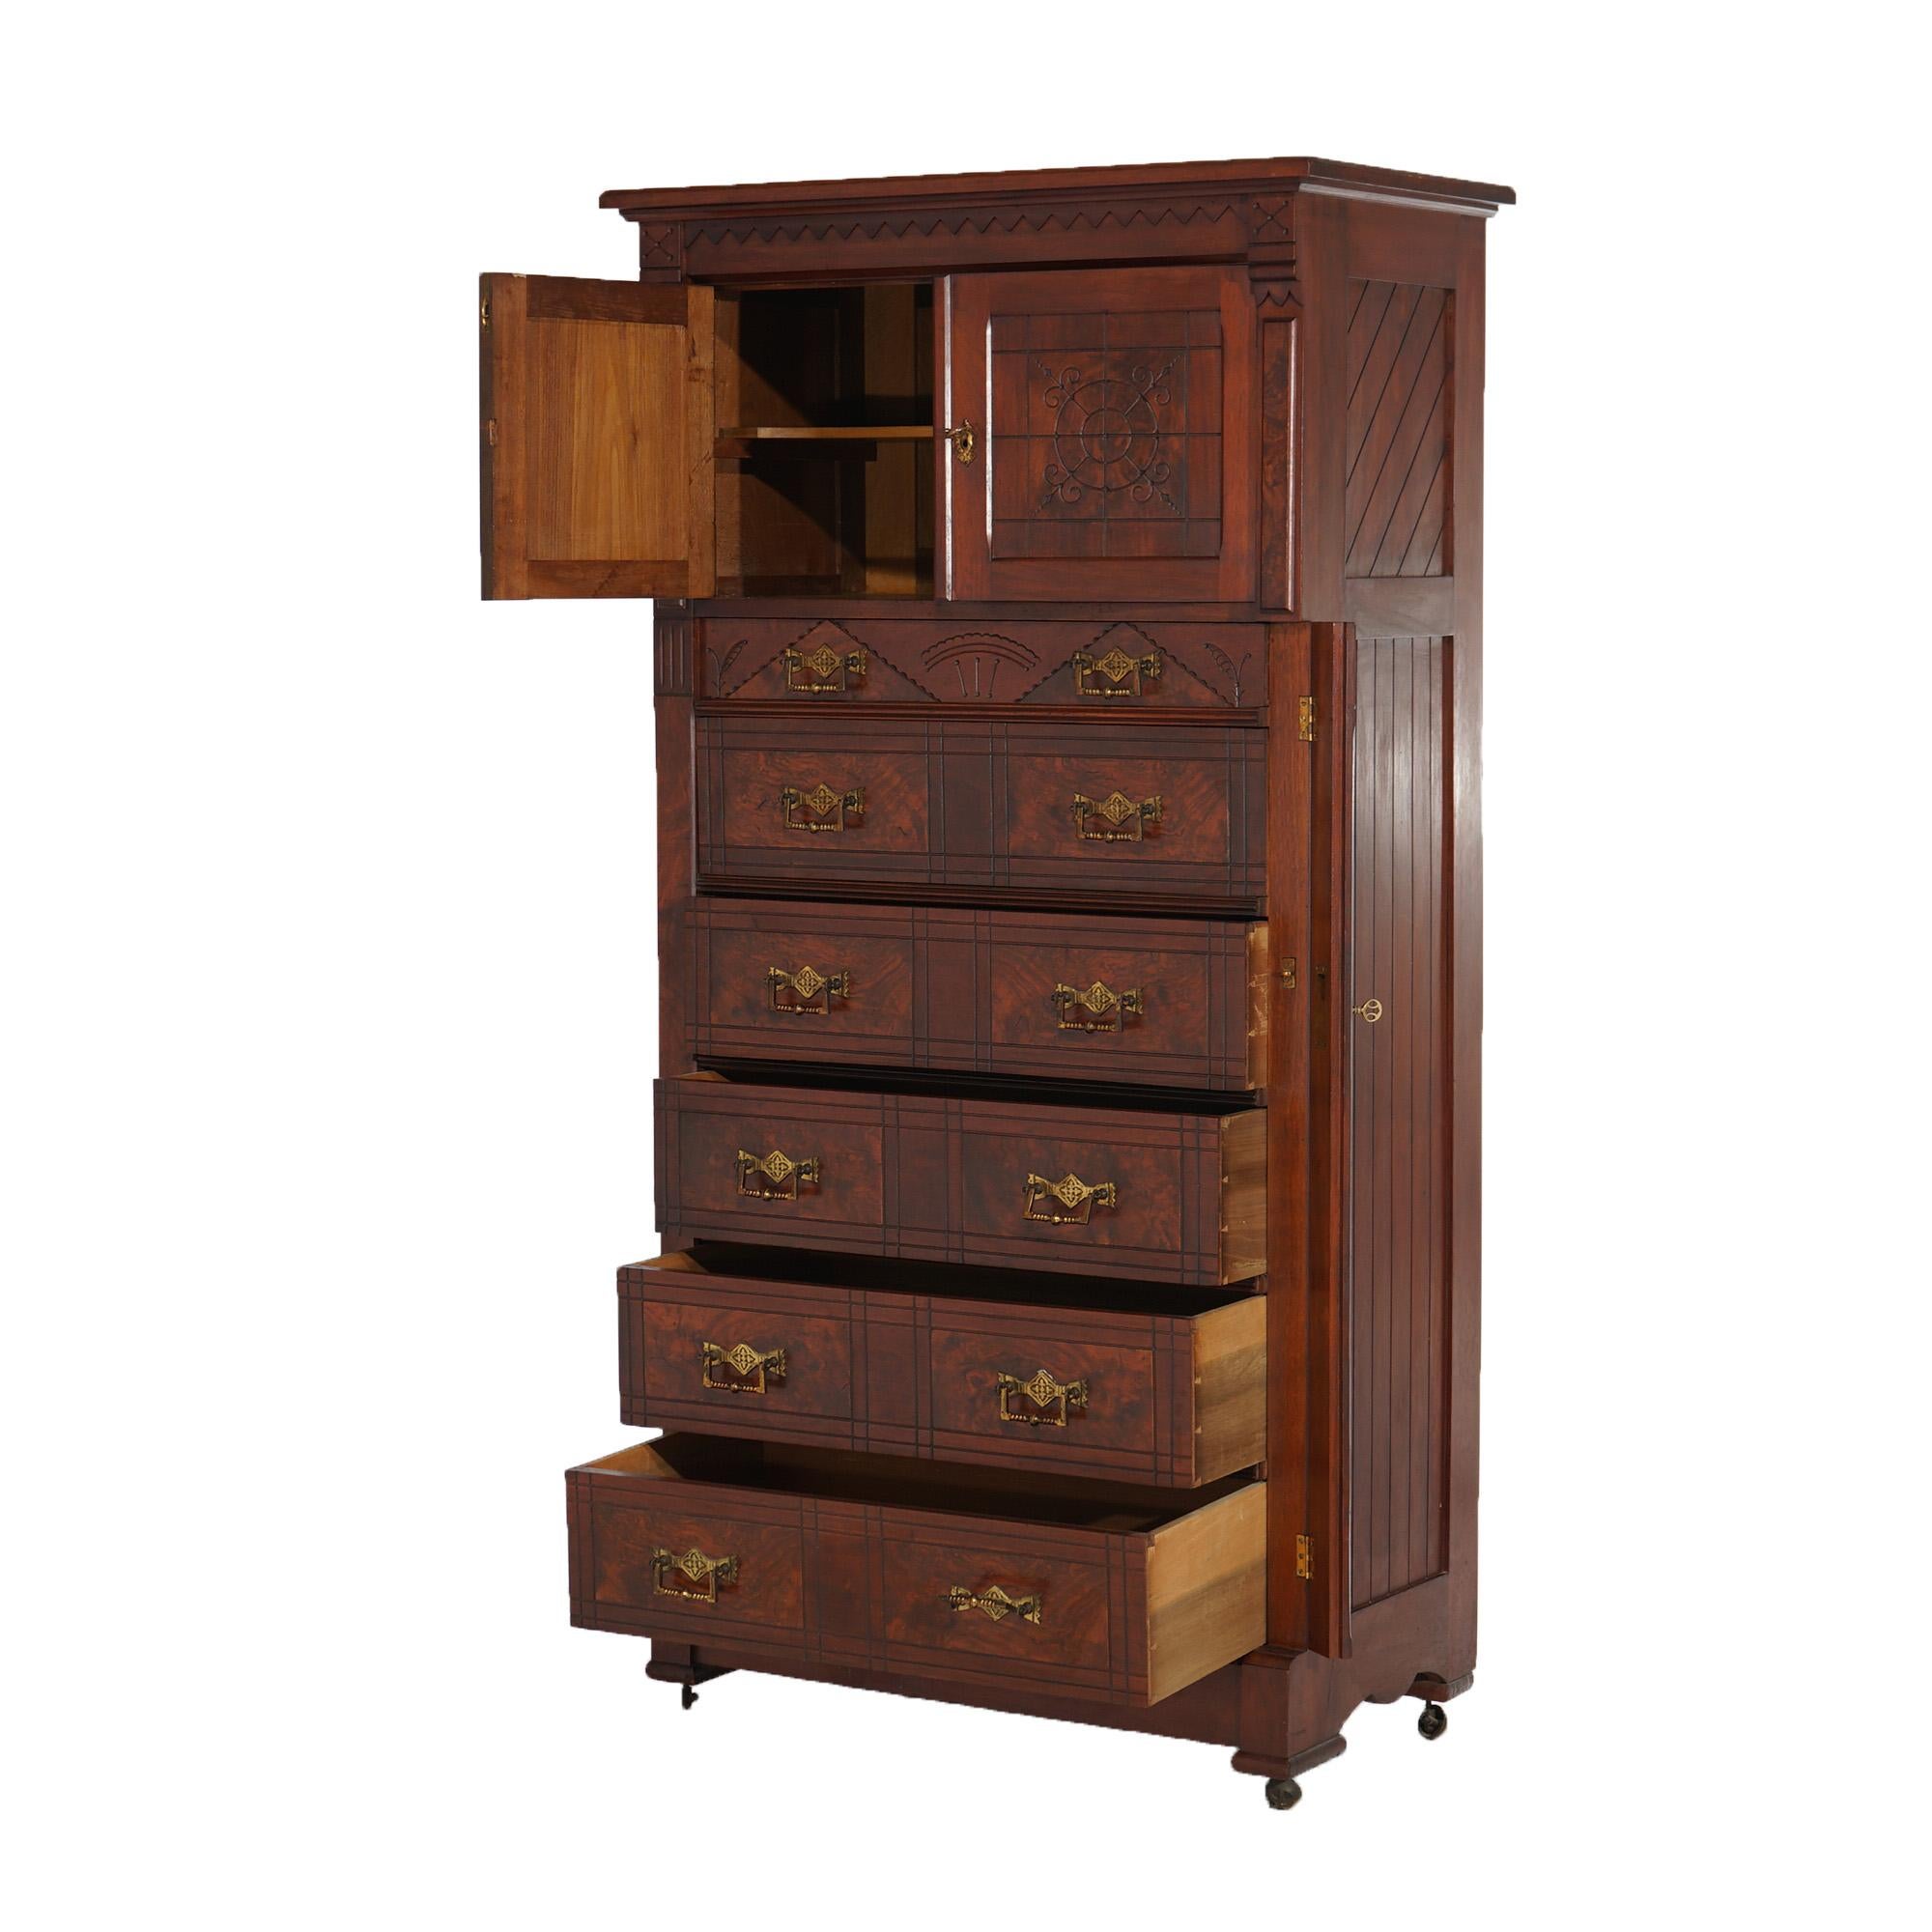 An antique Victorian Eastlake tall chest offers walnut construction with burl panels, incised decoration, and having upper double door cabinet over five long drawers, c1890

Measures- 67.5''H x 34.5''W x 19''D